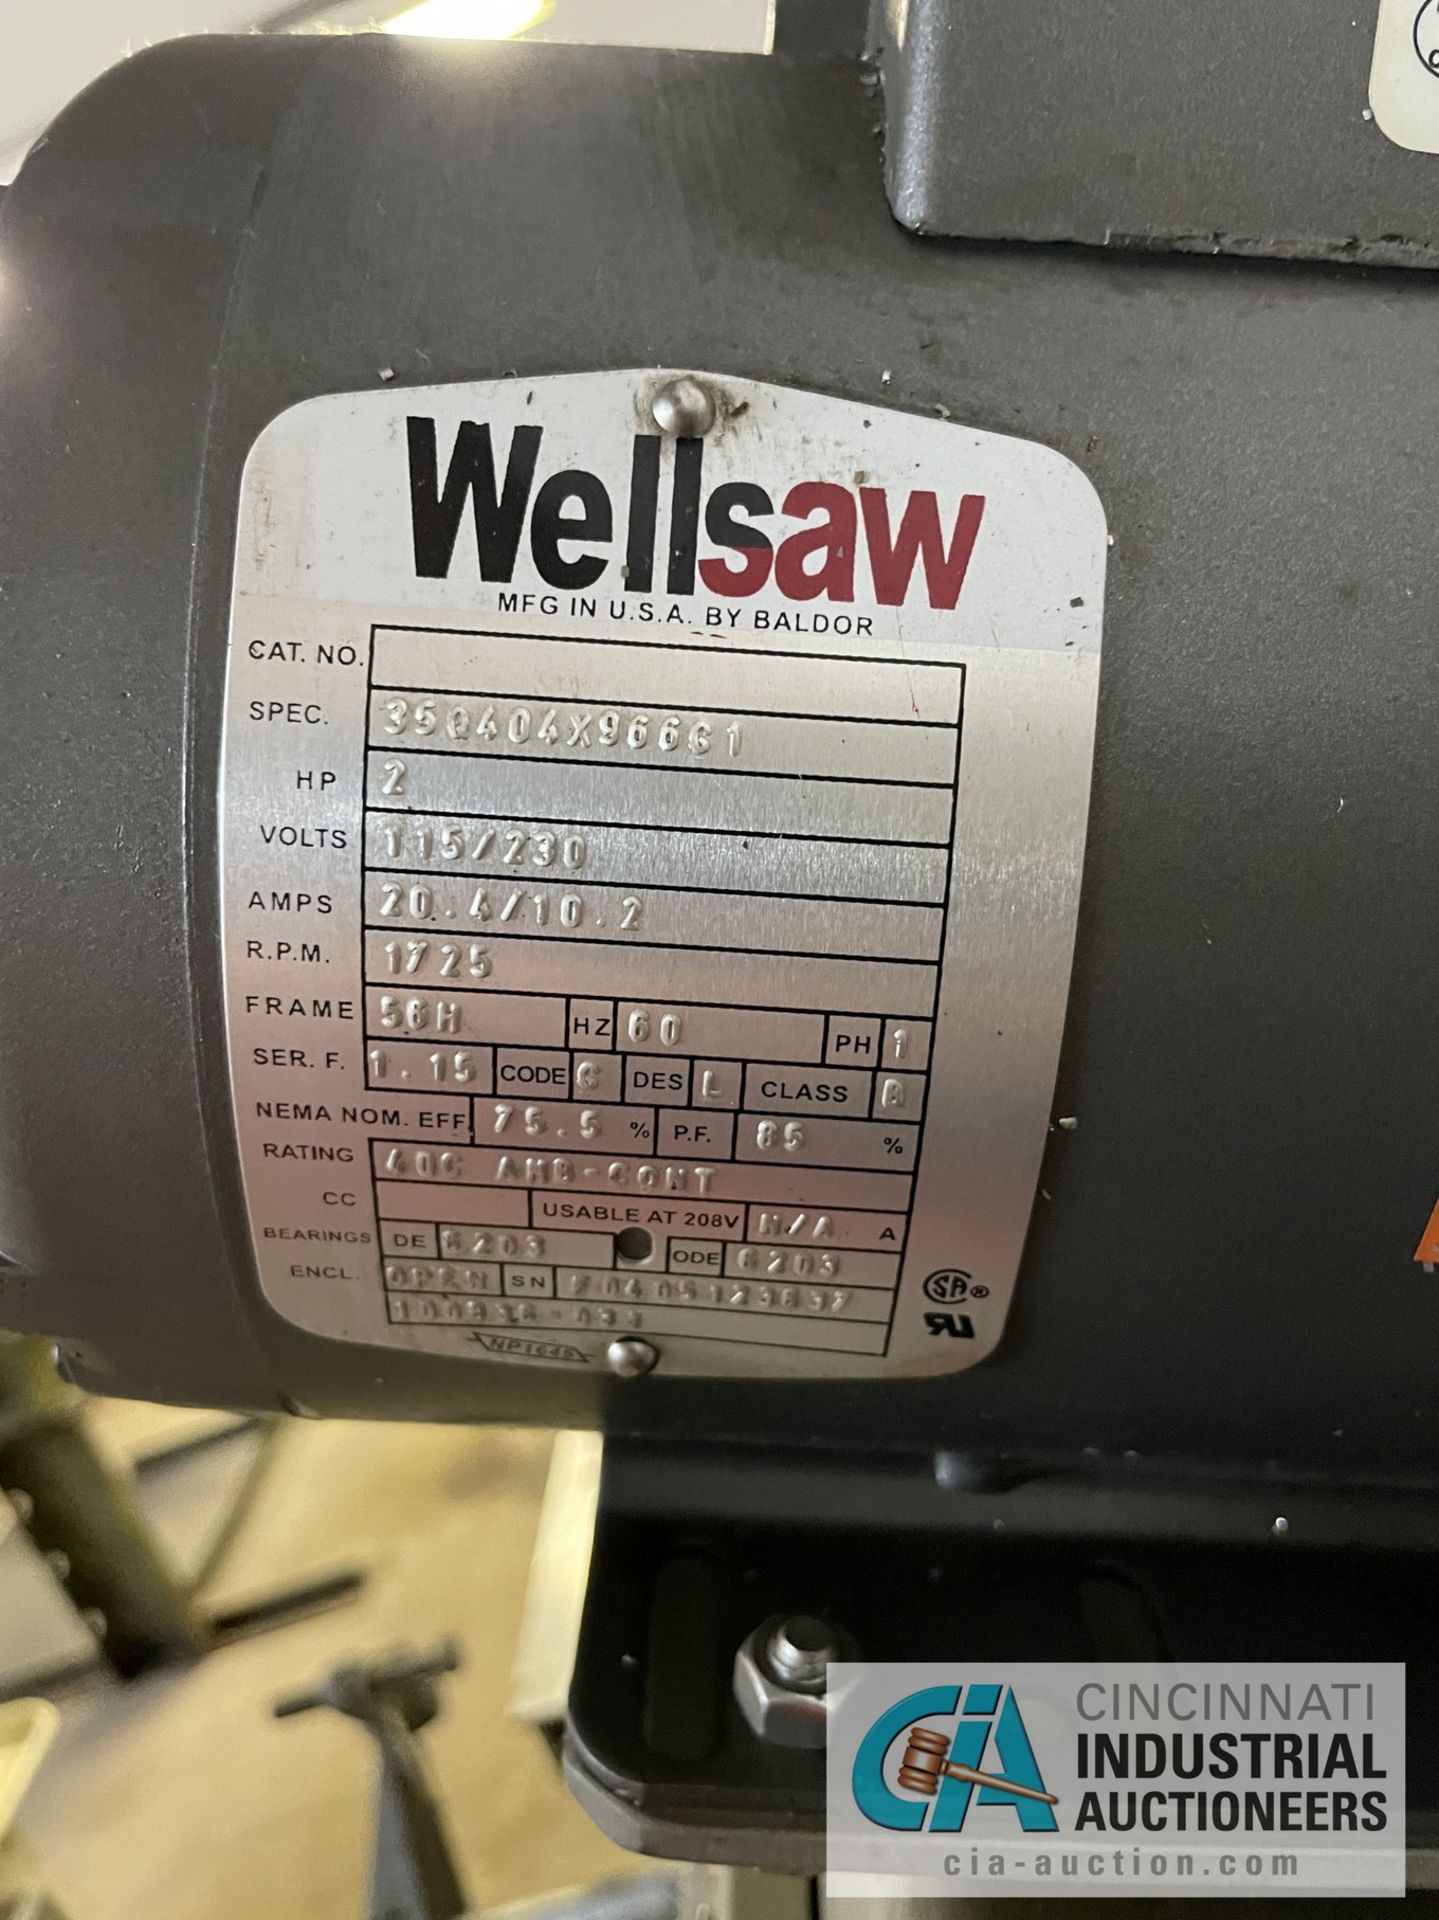 13" X 18" WELLSAW MODEL 1118 HORIZONTAL BAND SAW; S/N 3489, SINGLE PHASE, 115 VOLTS, 2 HP MOTOR - Image 9 of 12